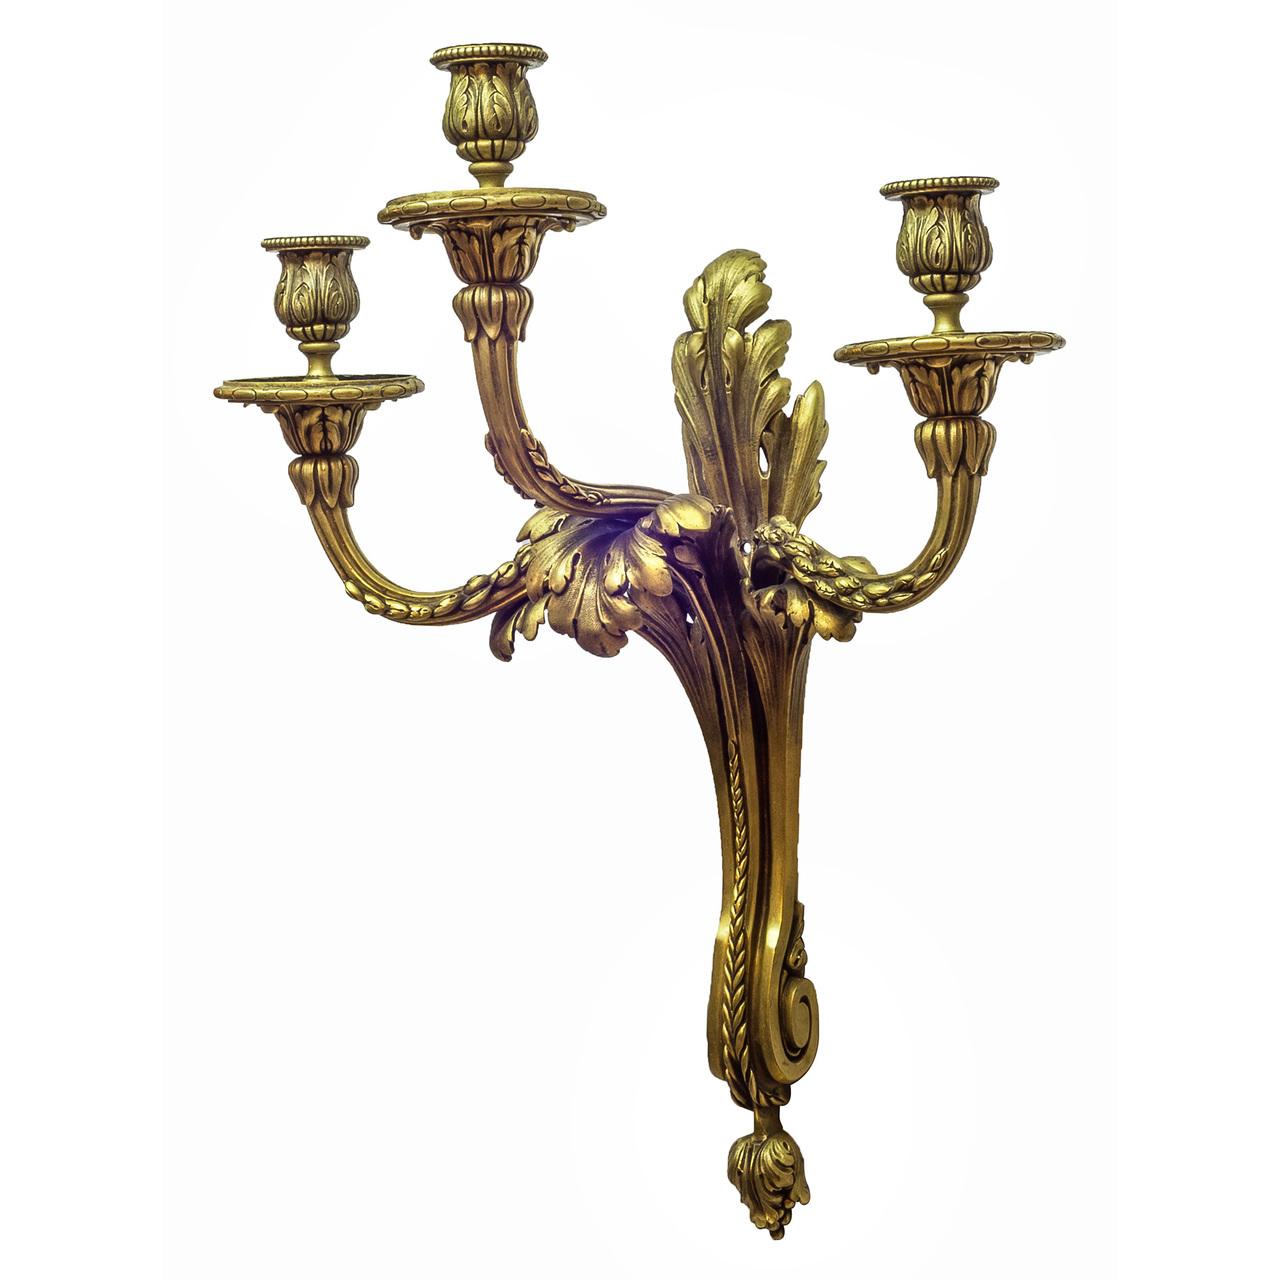 An exceptional pair of Caldwell gilt bronze three light sconces, featuring an acanthus leaf design

Maker: Edward F. Caldwell Co. (1851-1914)
Date: circa 1900s
Origin: American
Size: 19 x 15-1/2 x 11-1/2 inches.